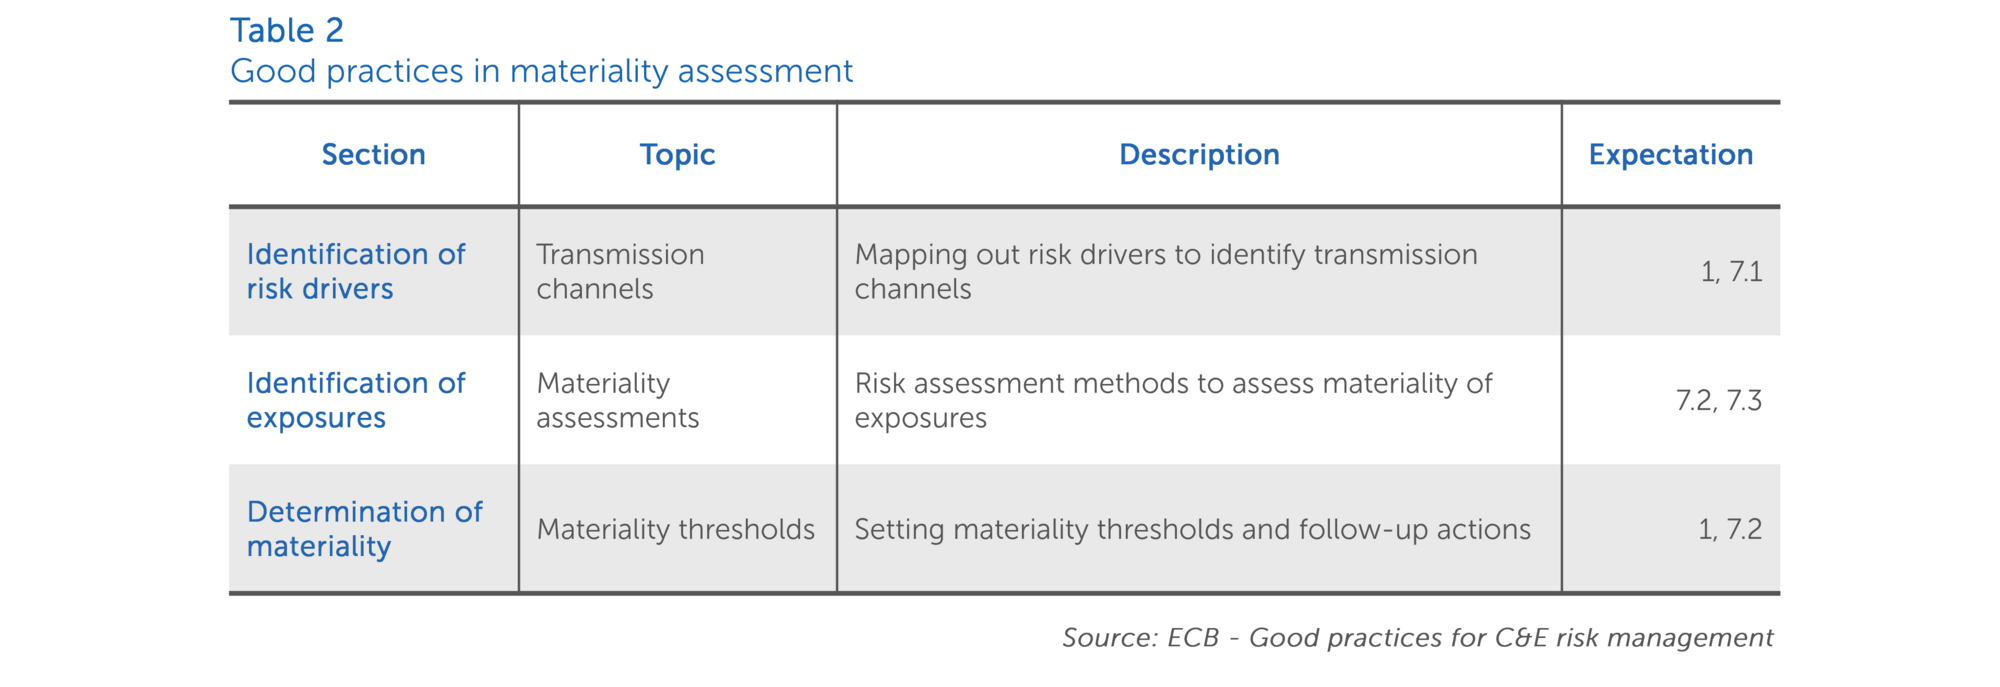 Finalyse expert's take on physical risk prototype - ECB good practices in physical risk assessment